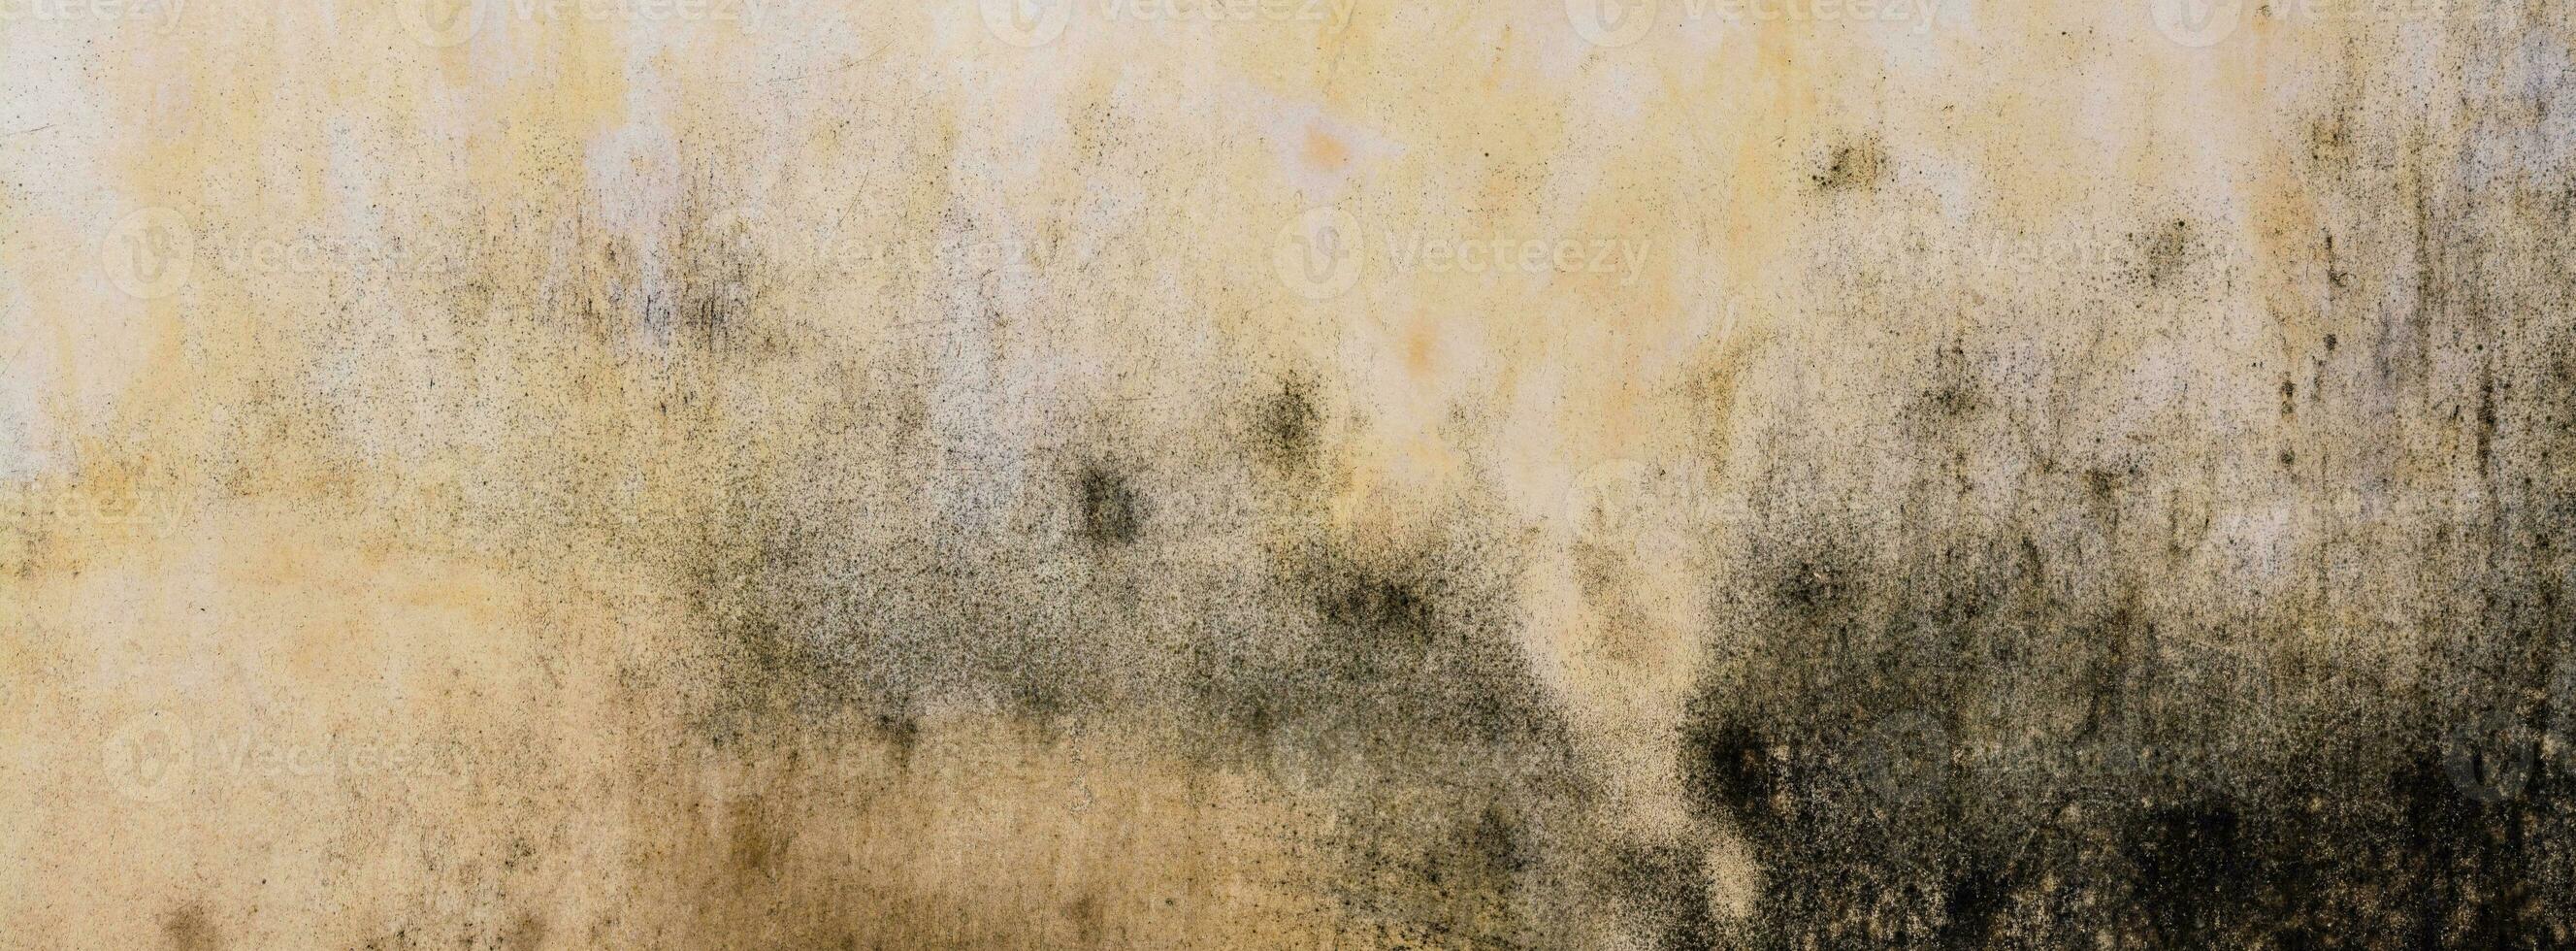 Cement wall background. Texture placed over an object to create a grunge effect for your design. photo